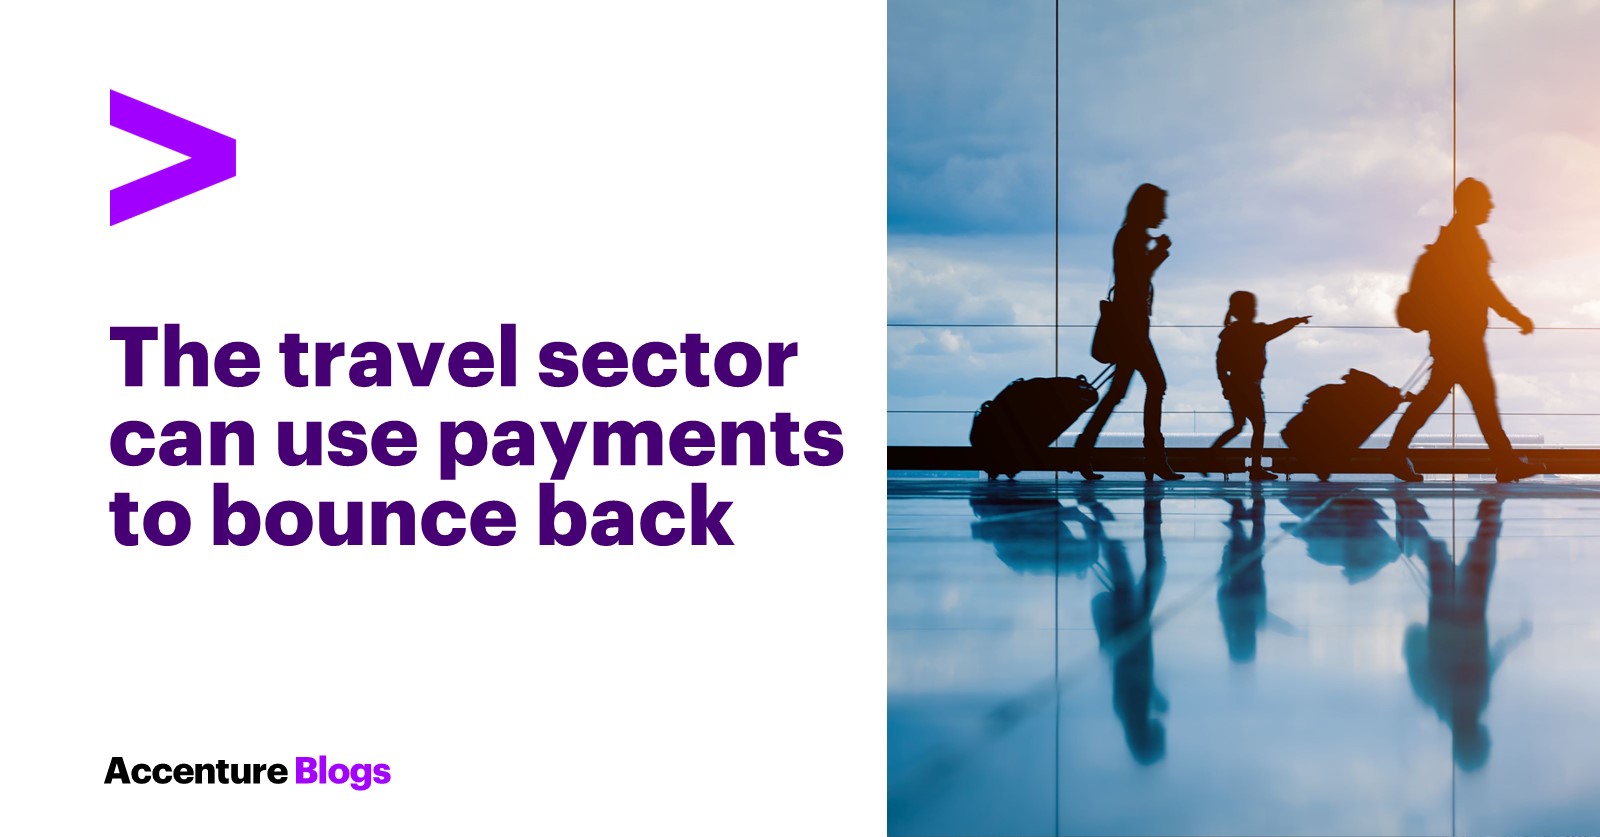 travel time payments uk